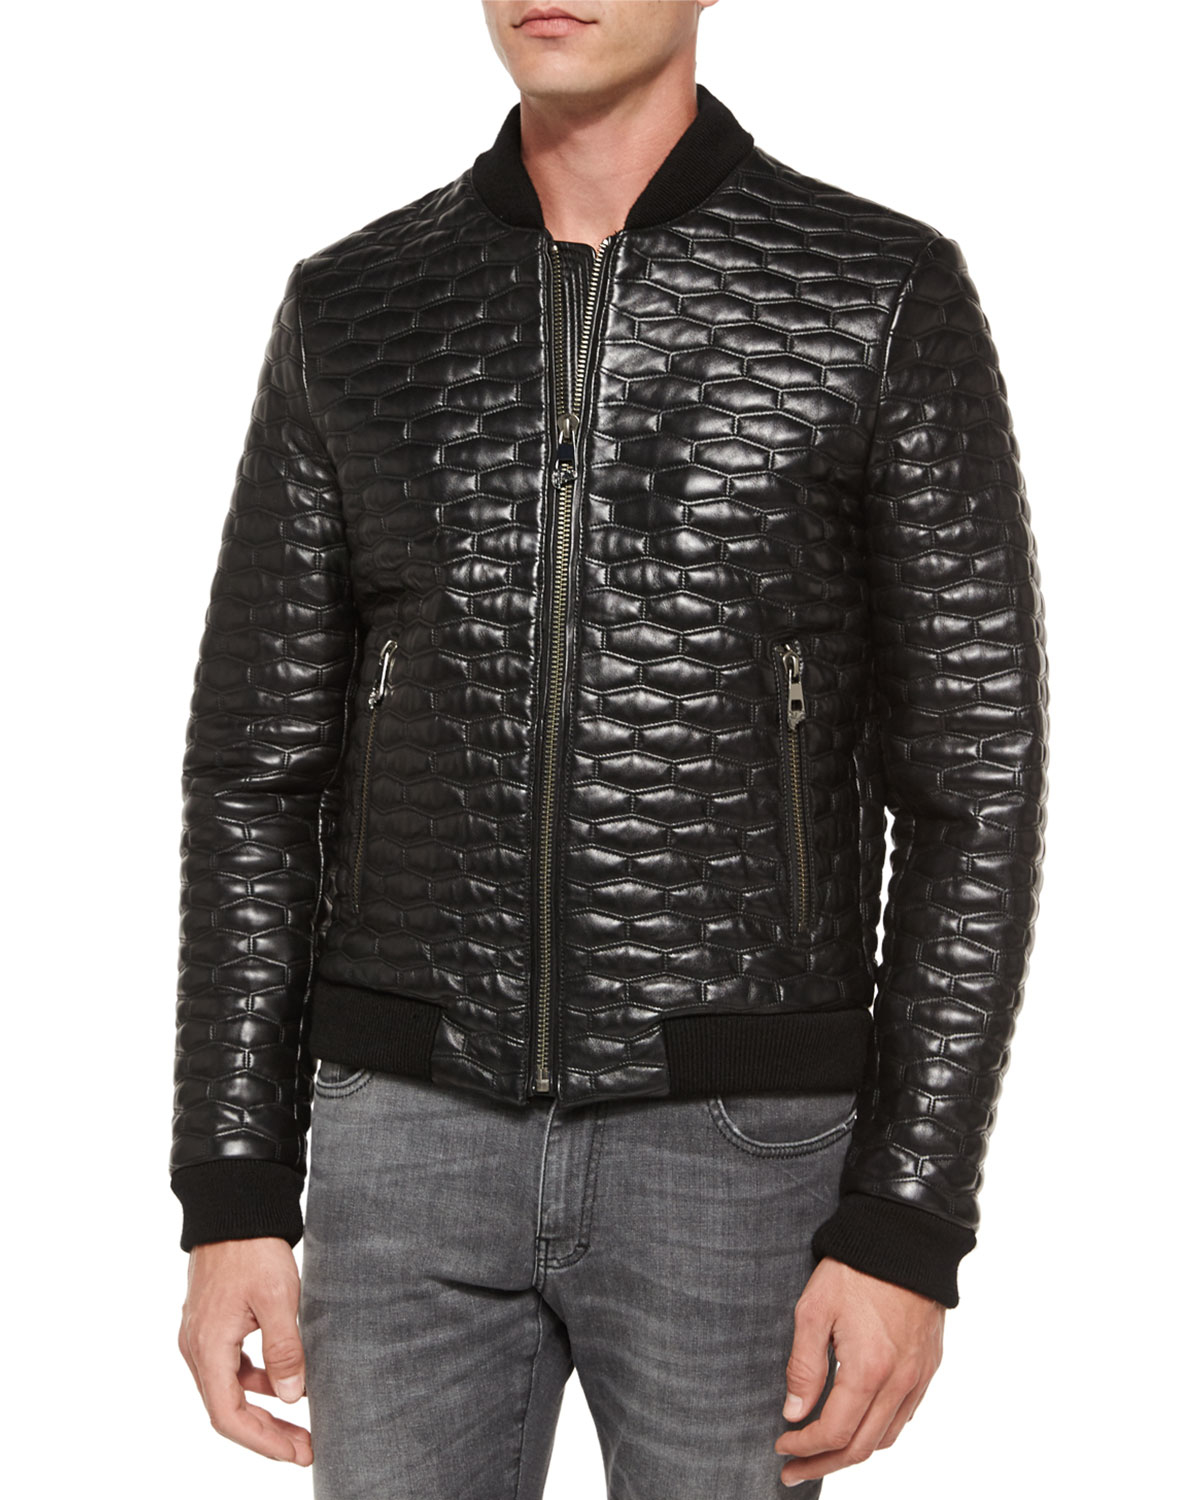 Lyst - Versace Quilted Leather Jacket in Black for Men